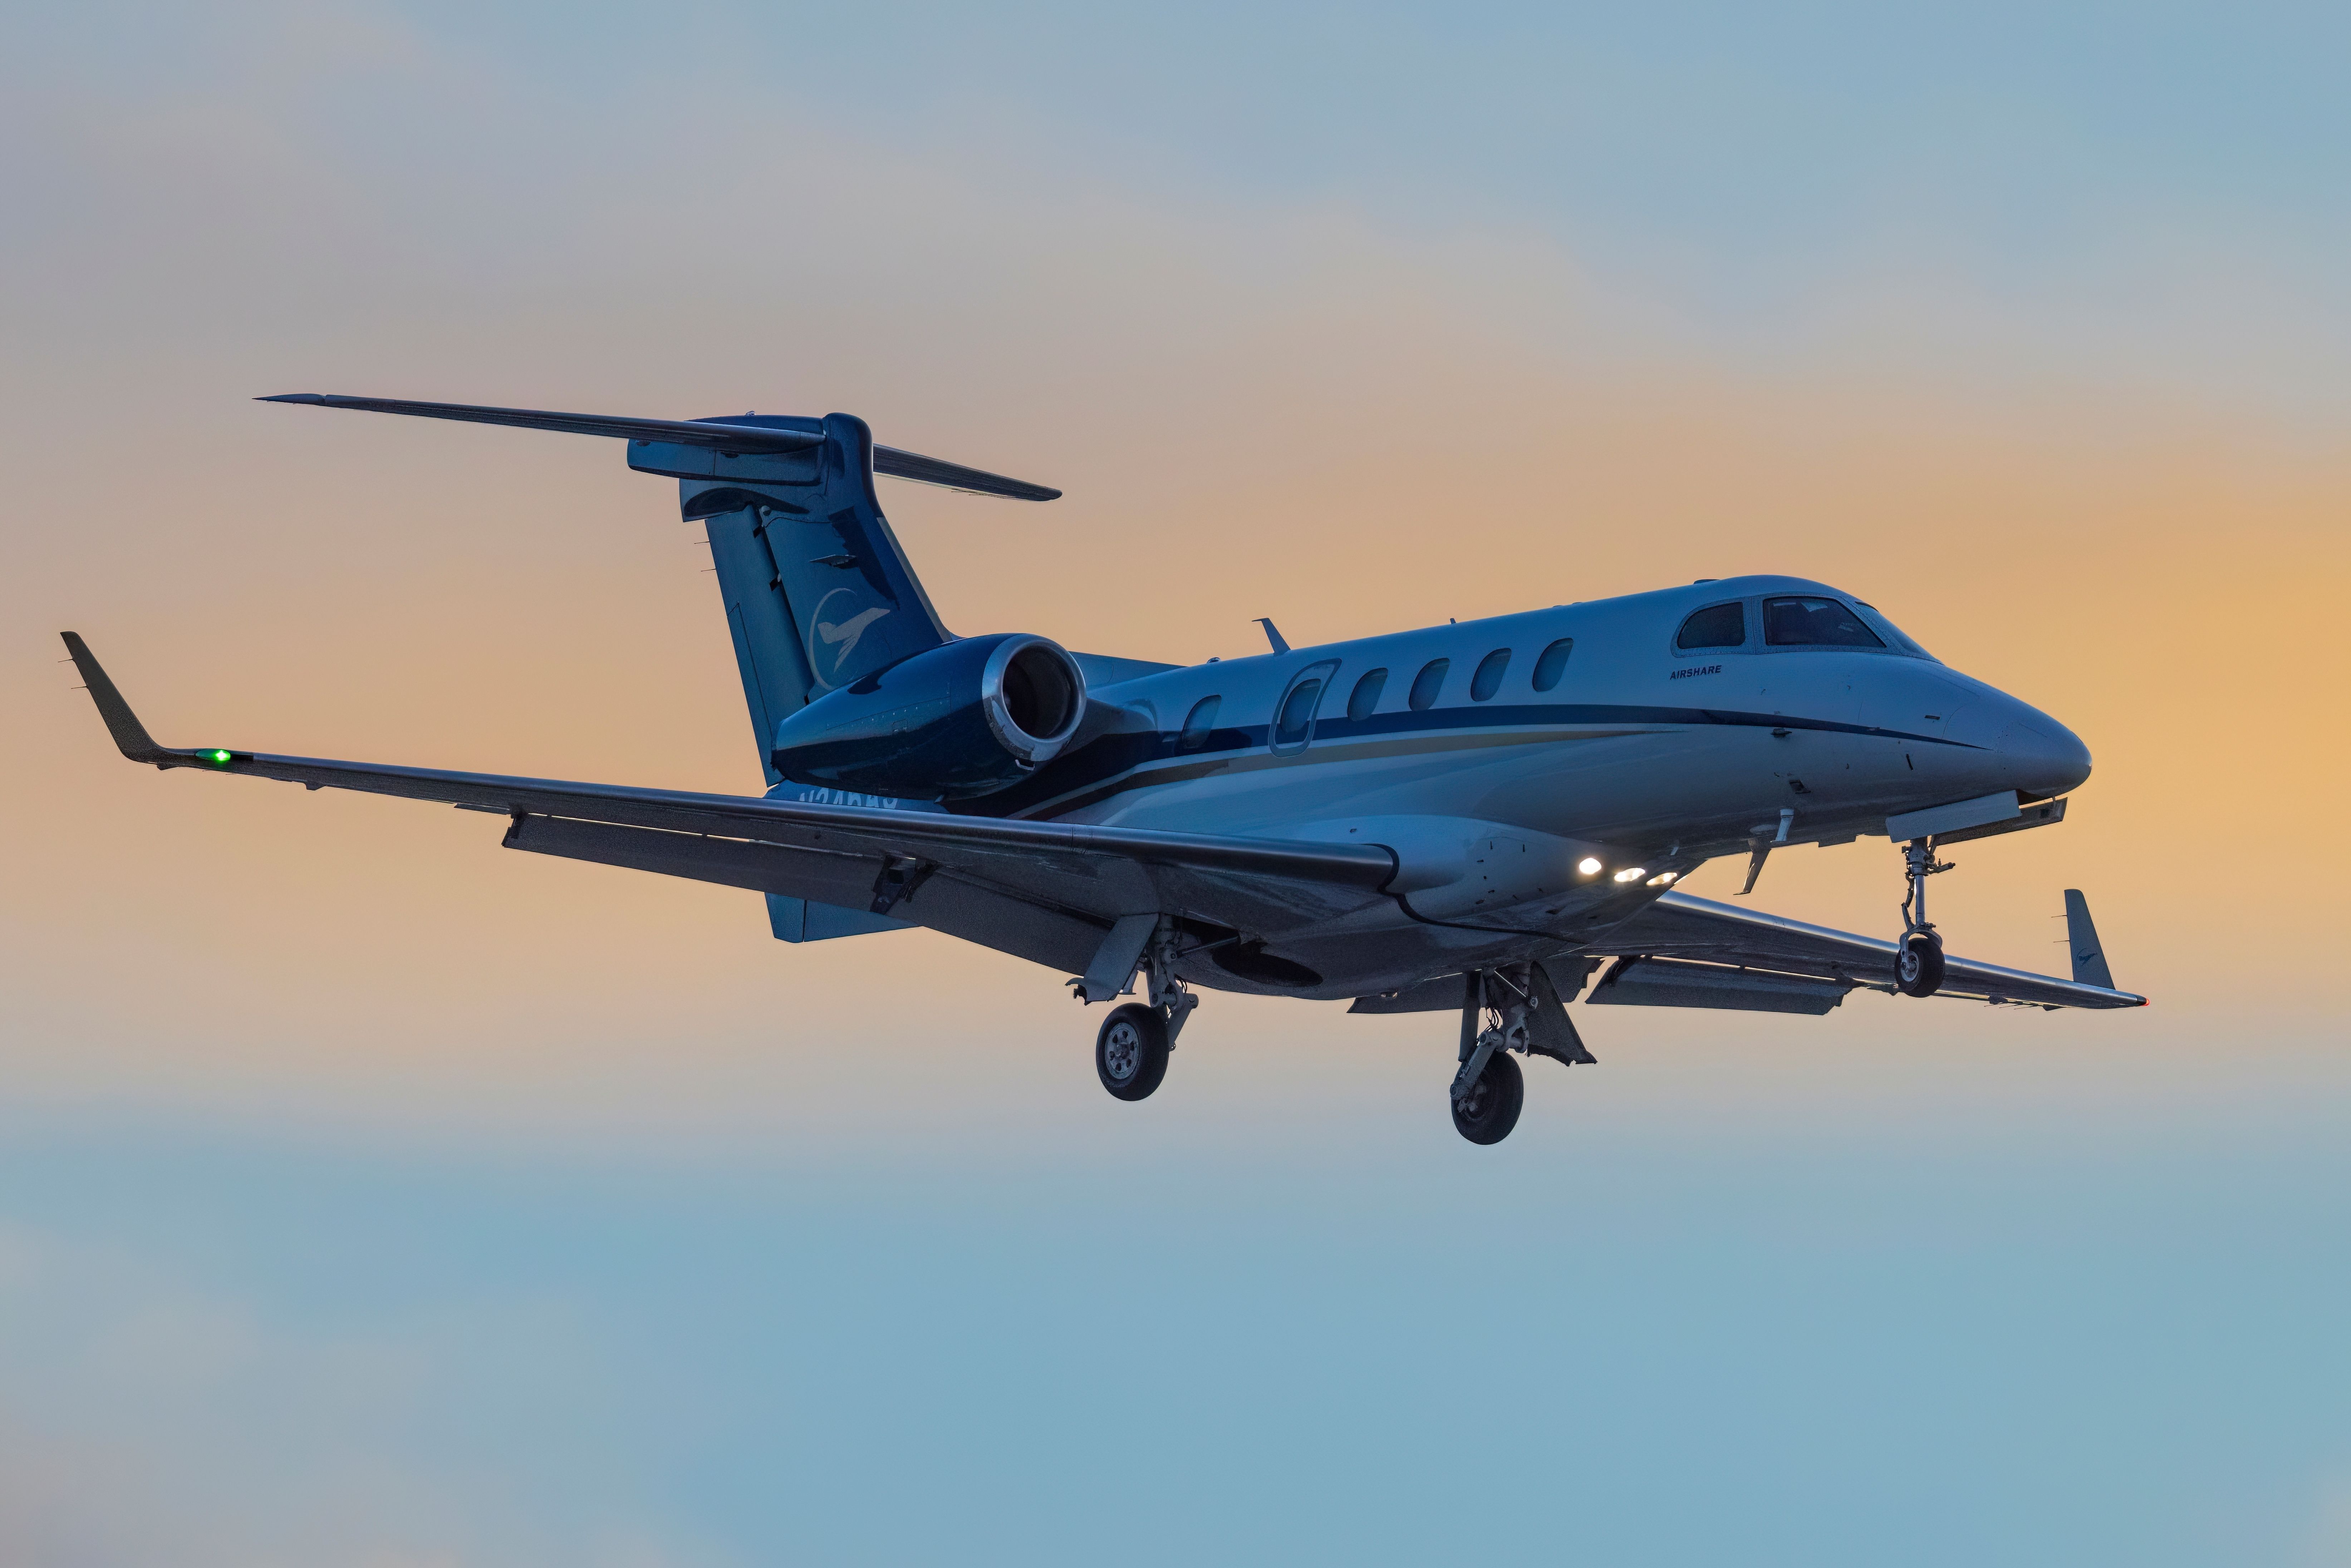 An Embraer Phenom 300 on final approach during sunset.